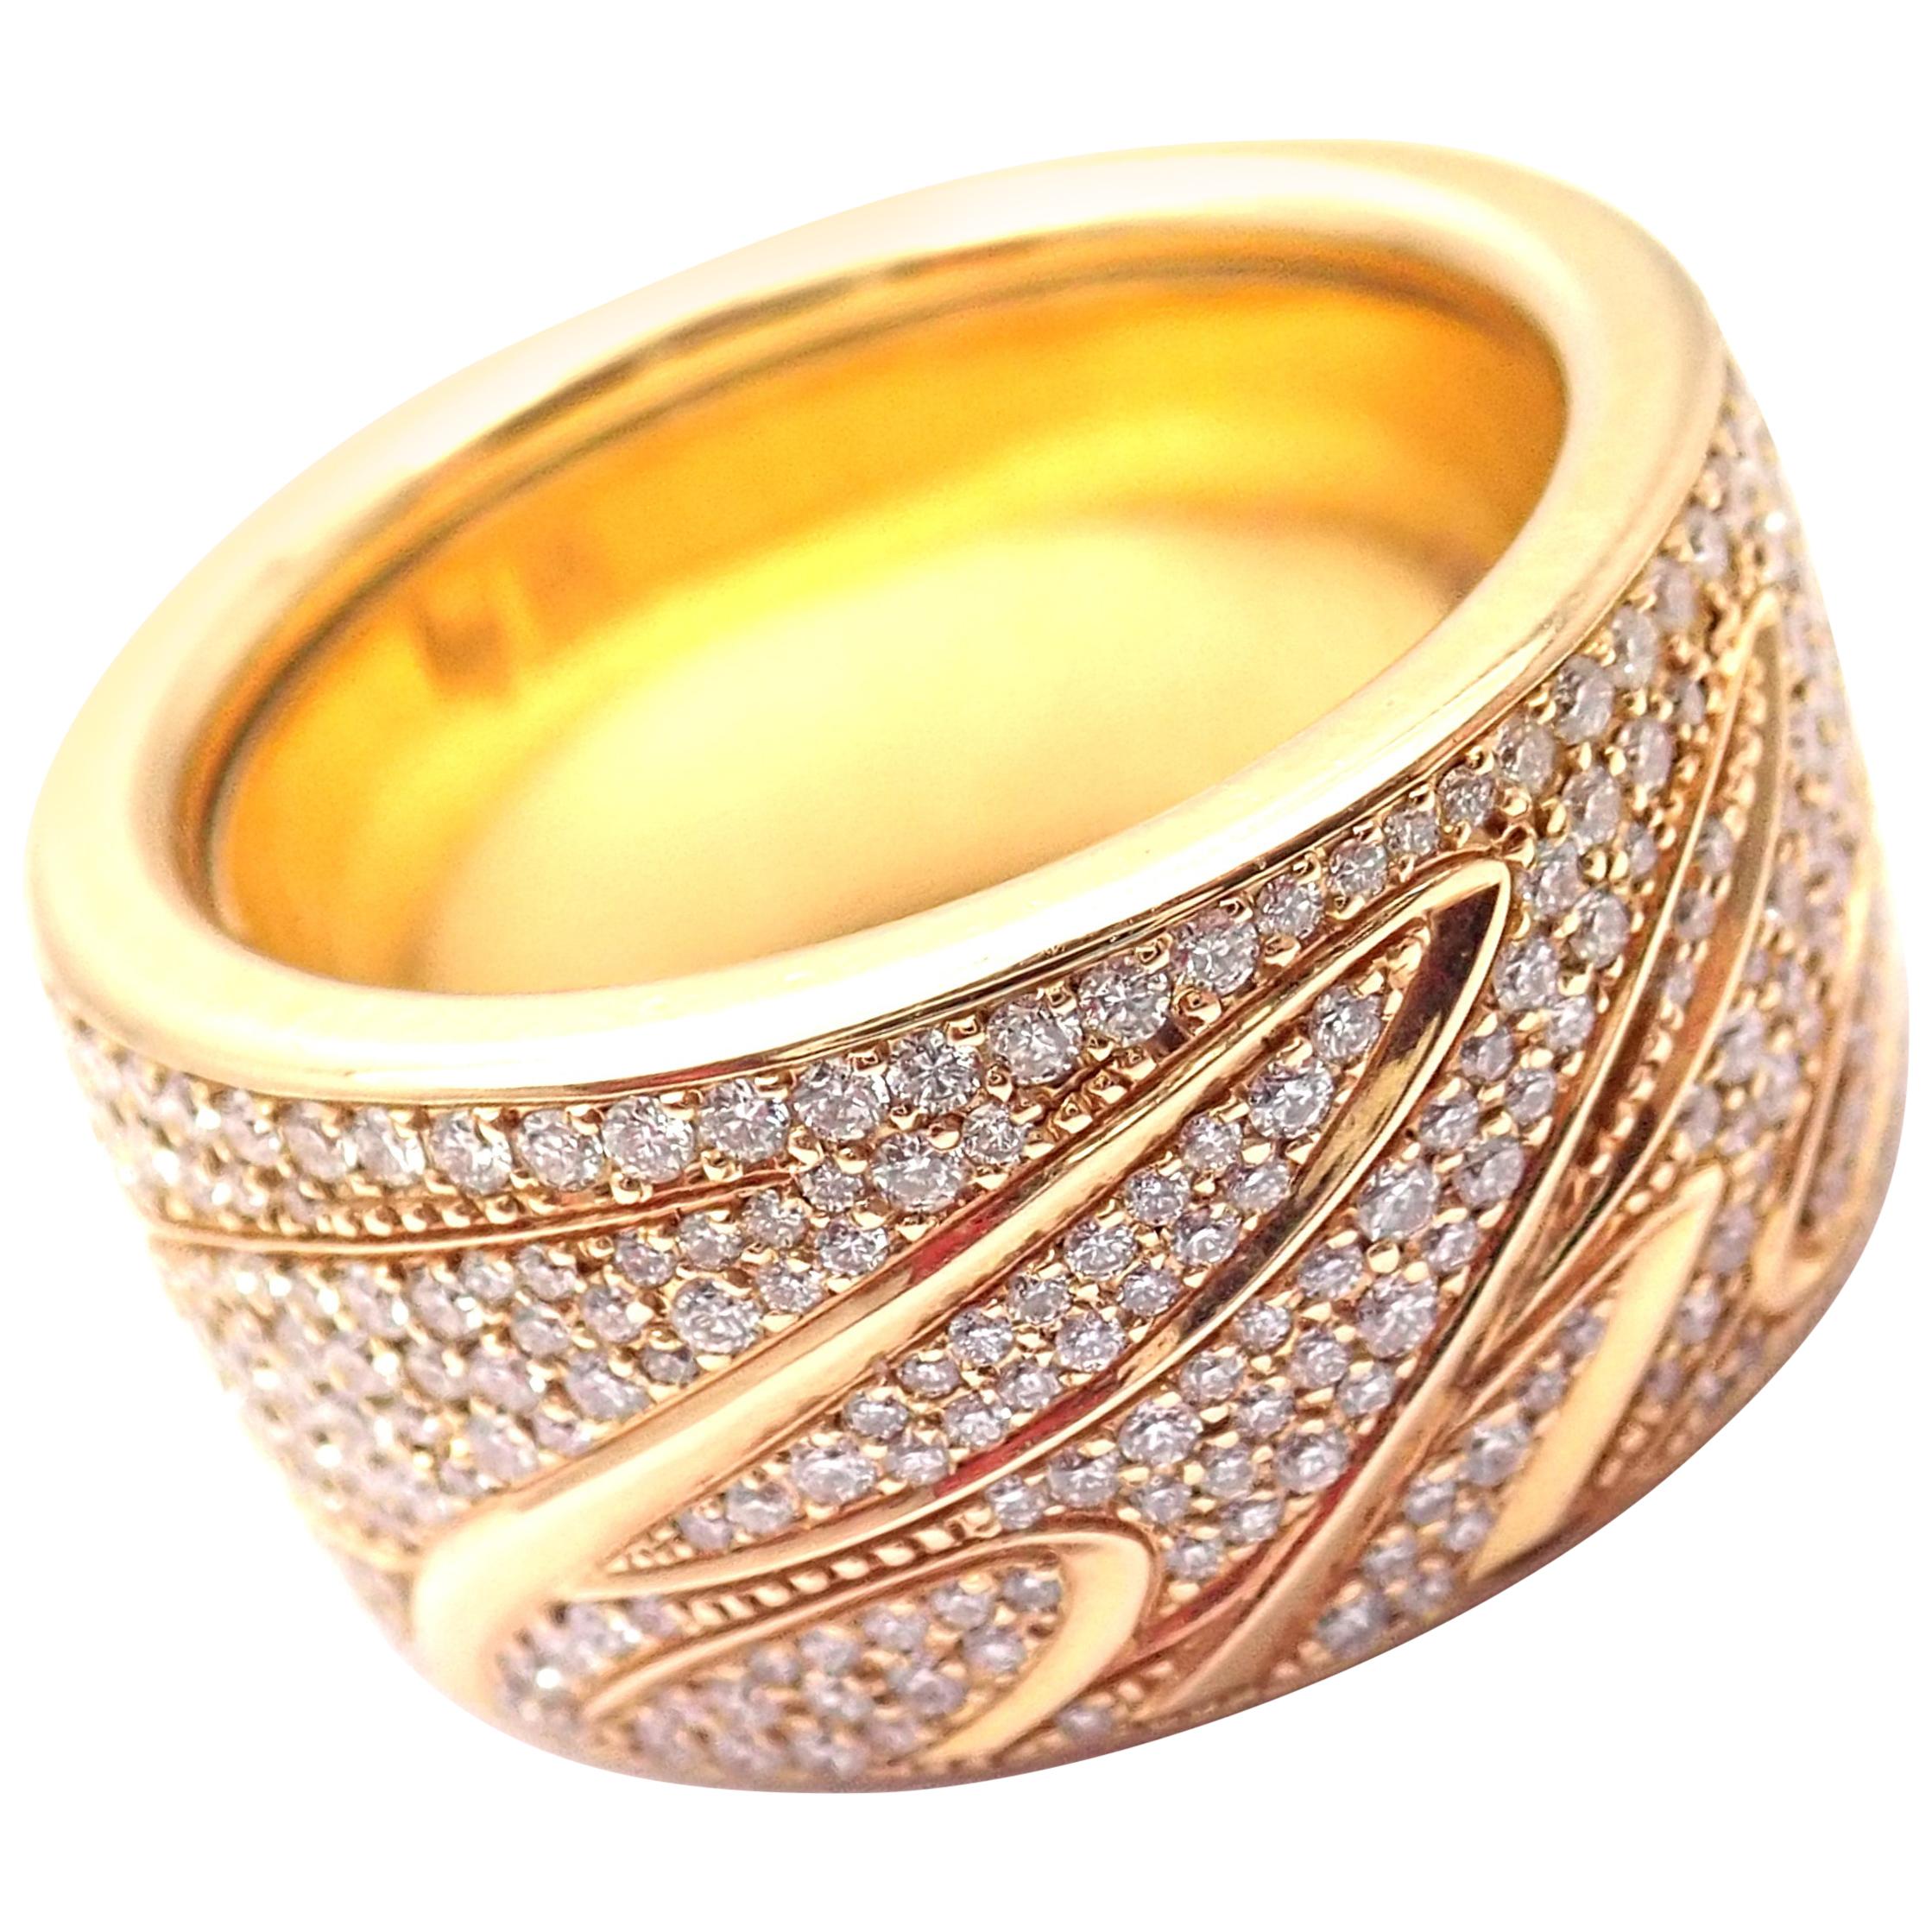 Chopard Chopardissimo 18 Karat Yellow Gold Pavé Diamond Signature Wide Band Ring For Sale